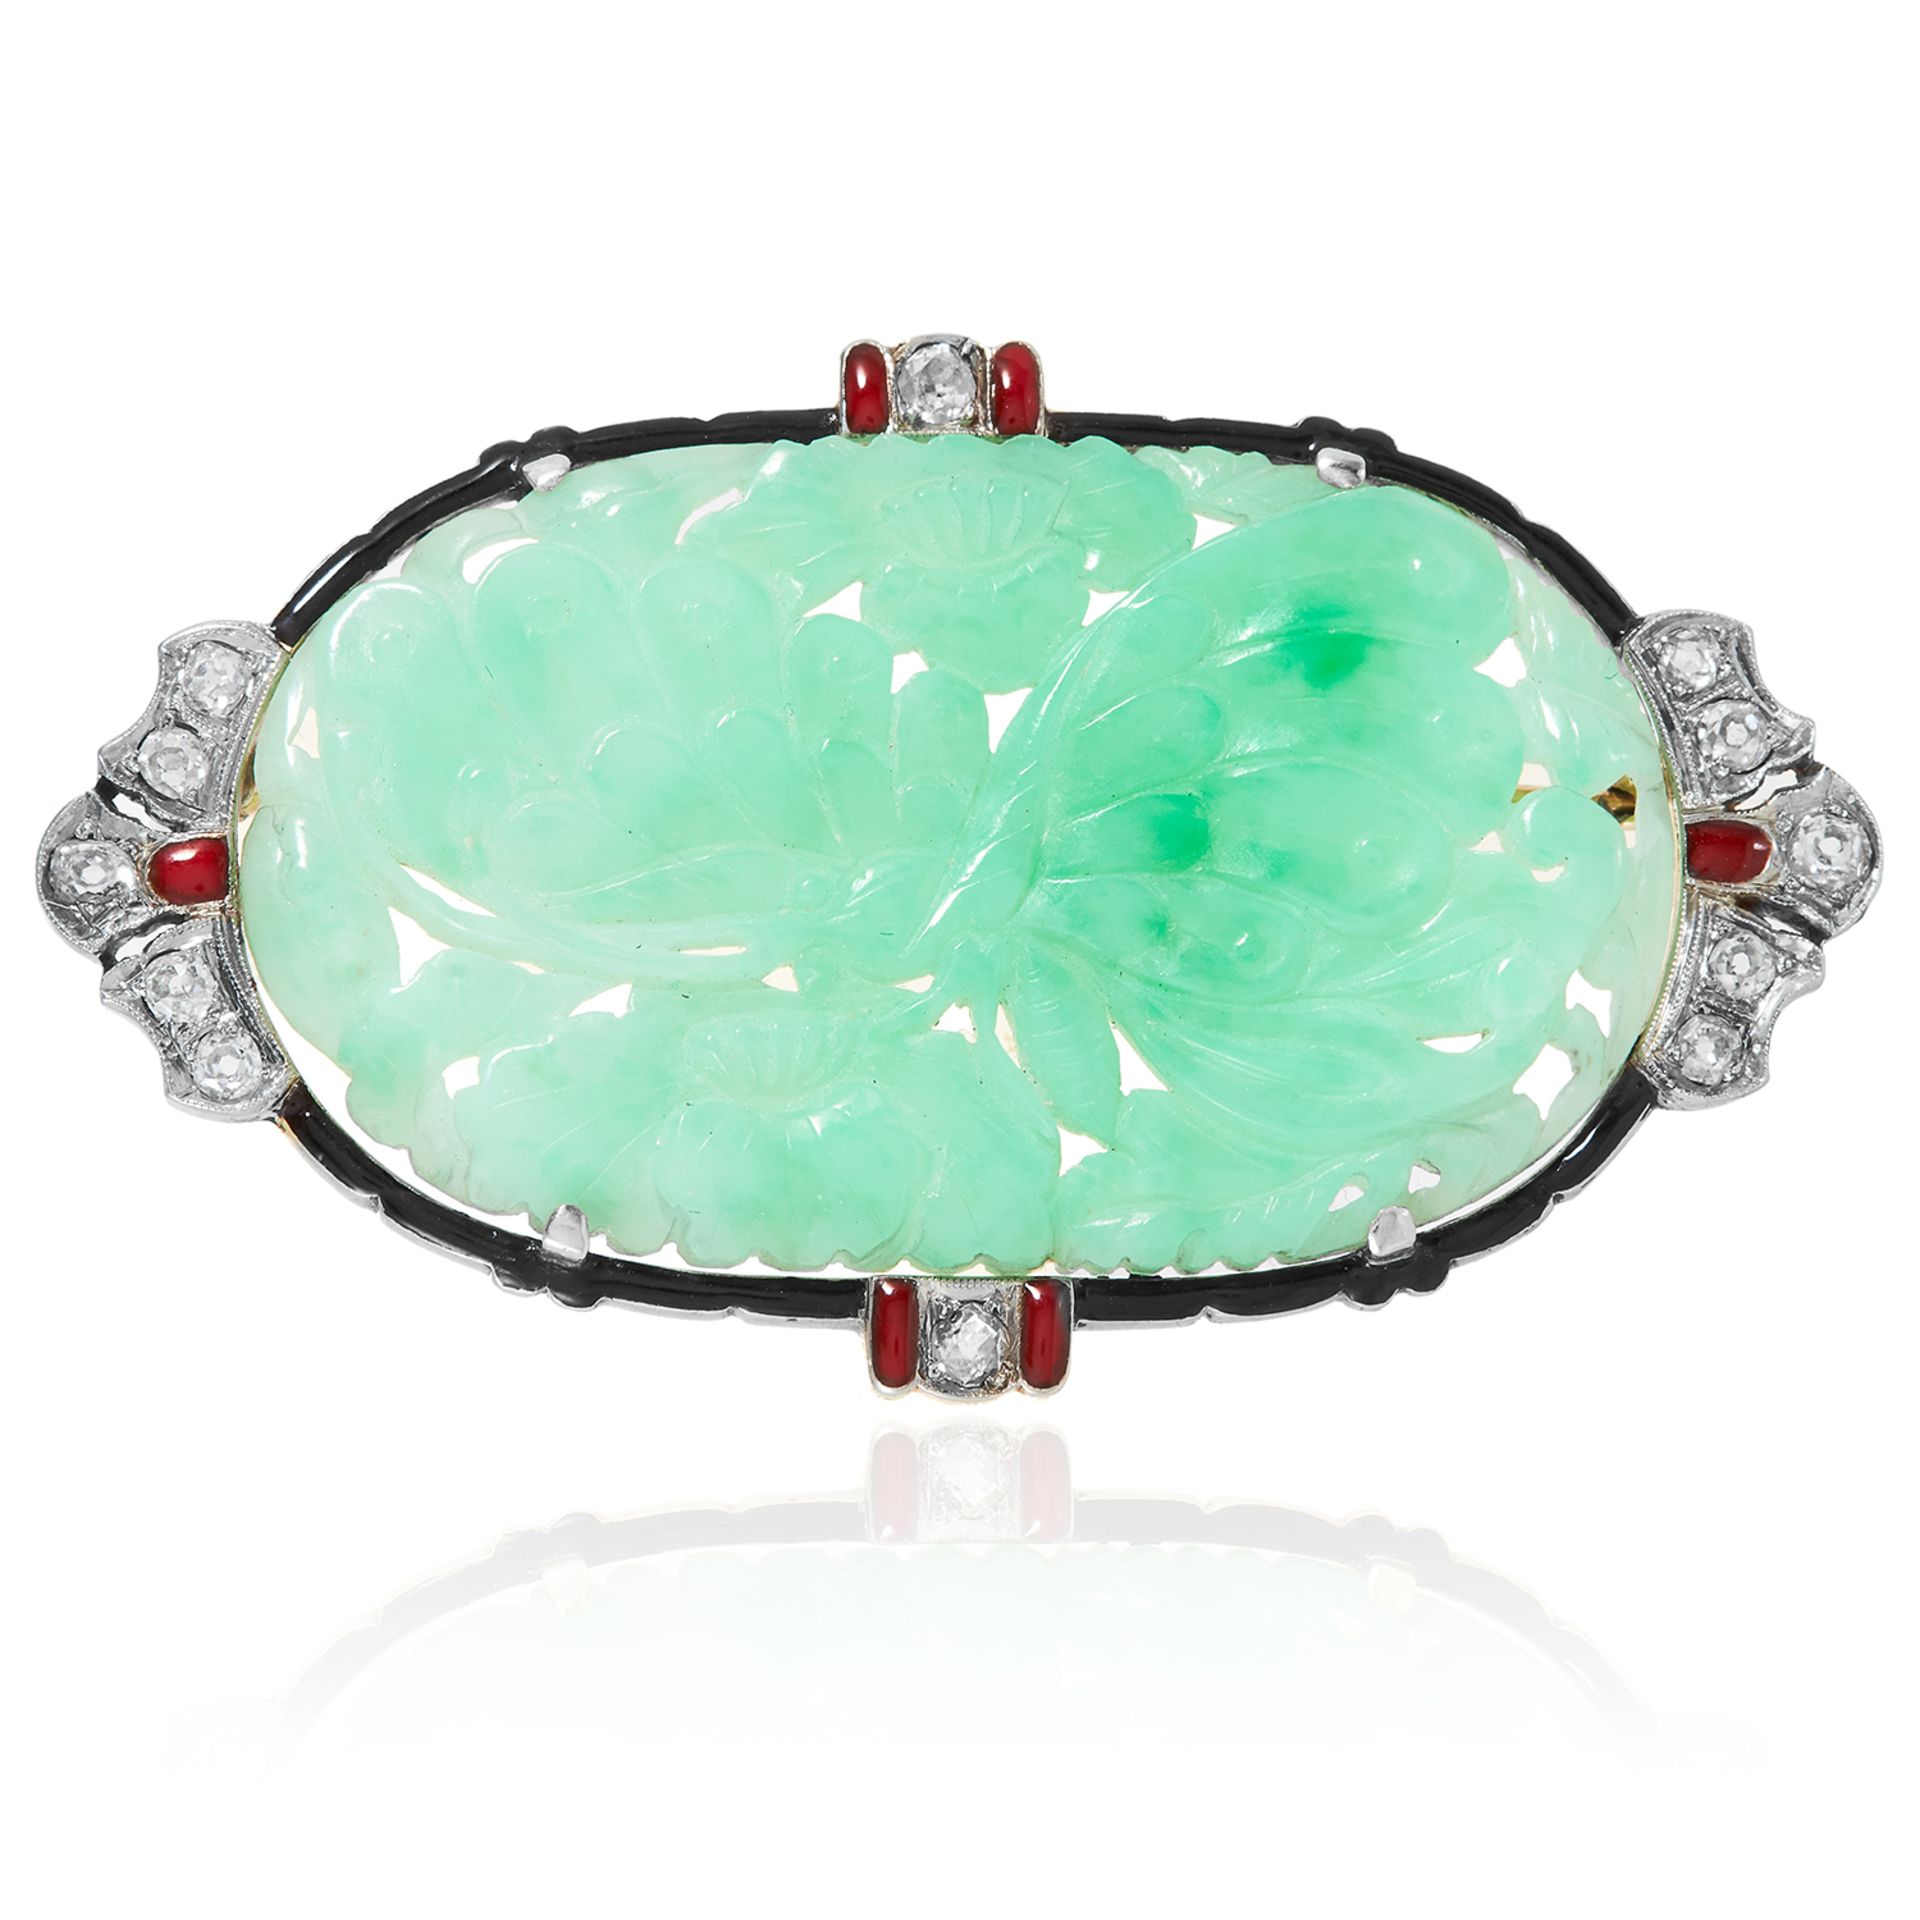 AN ART DECO JADEITE JADE, DIAMOND AND ENAMEL BROOCH in yellow gold, set with a carved jade plaque,